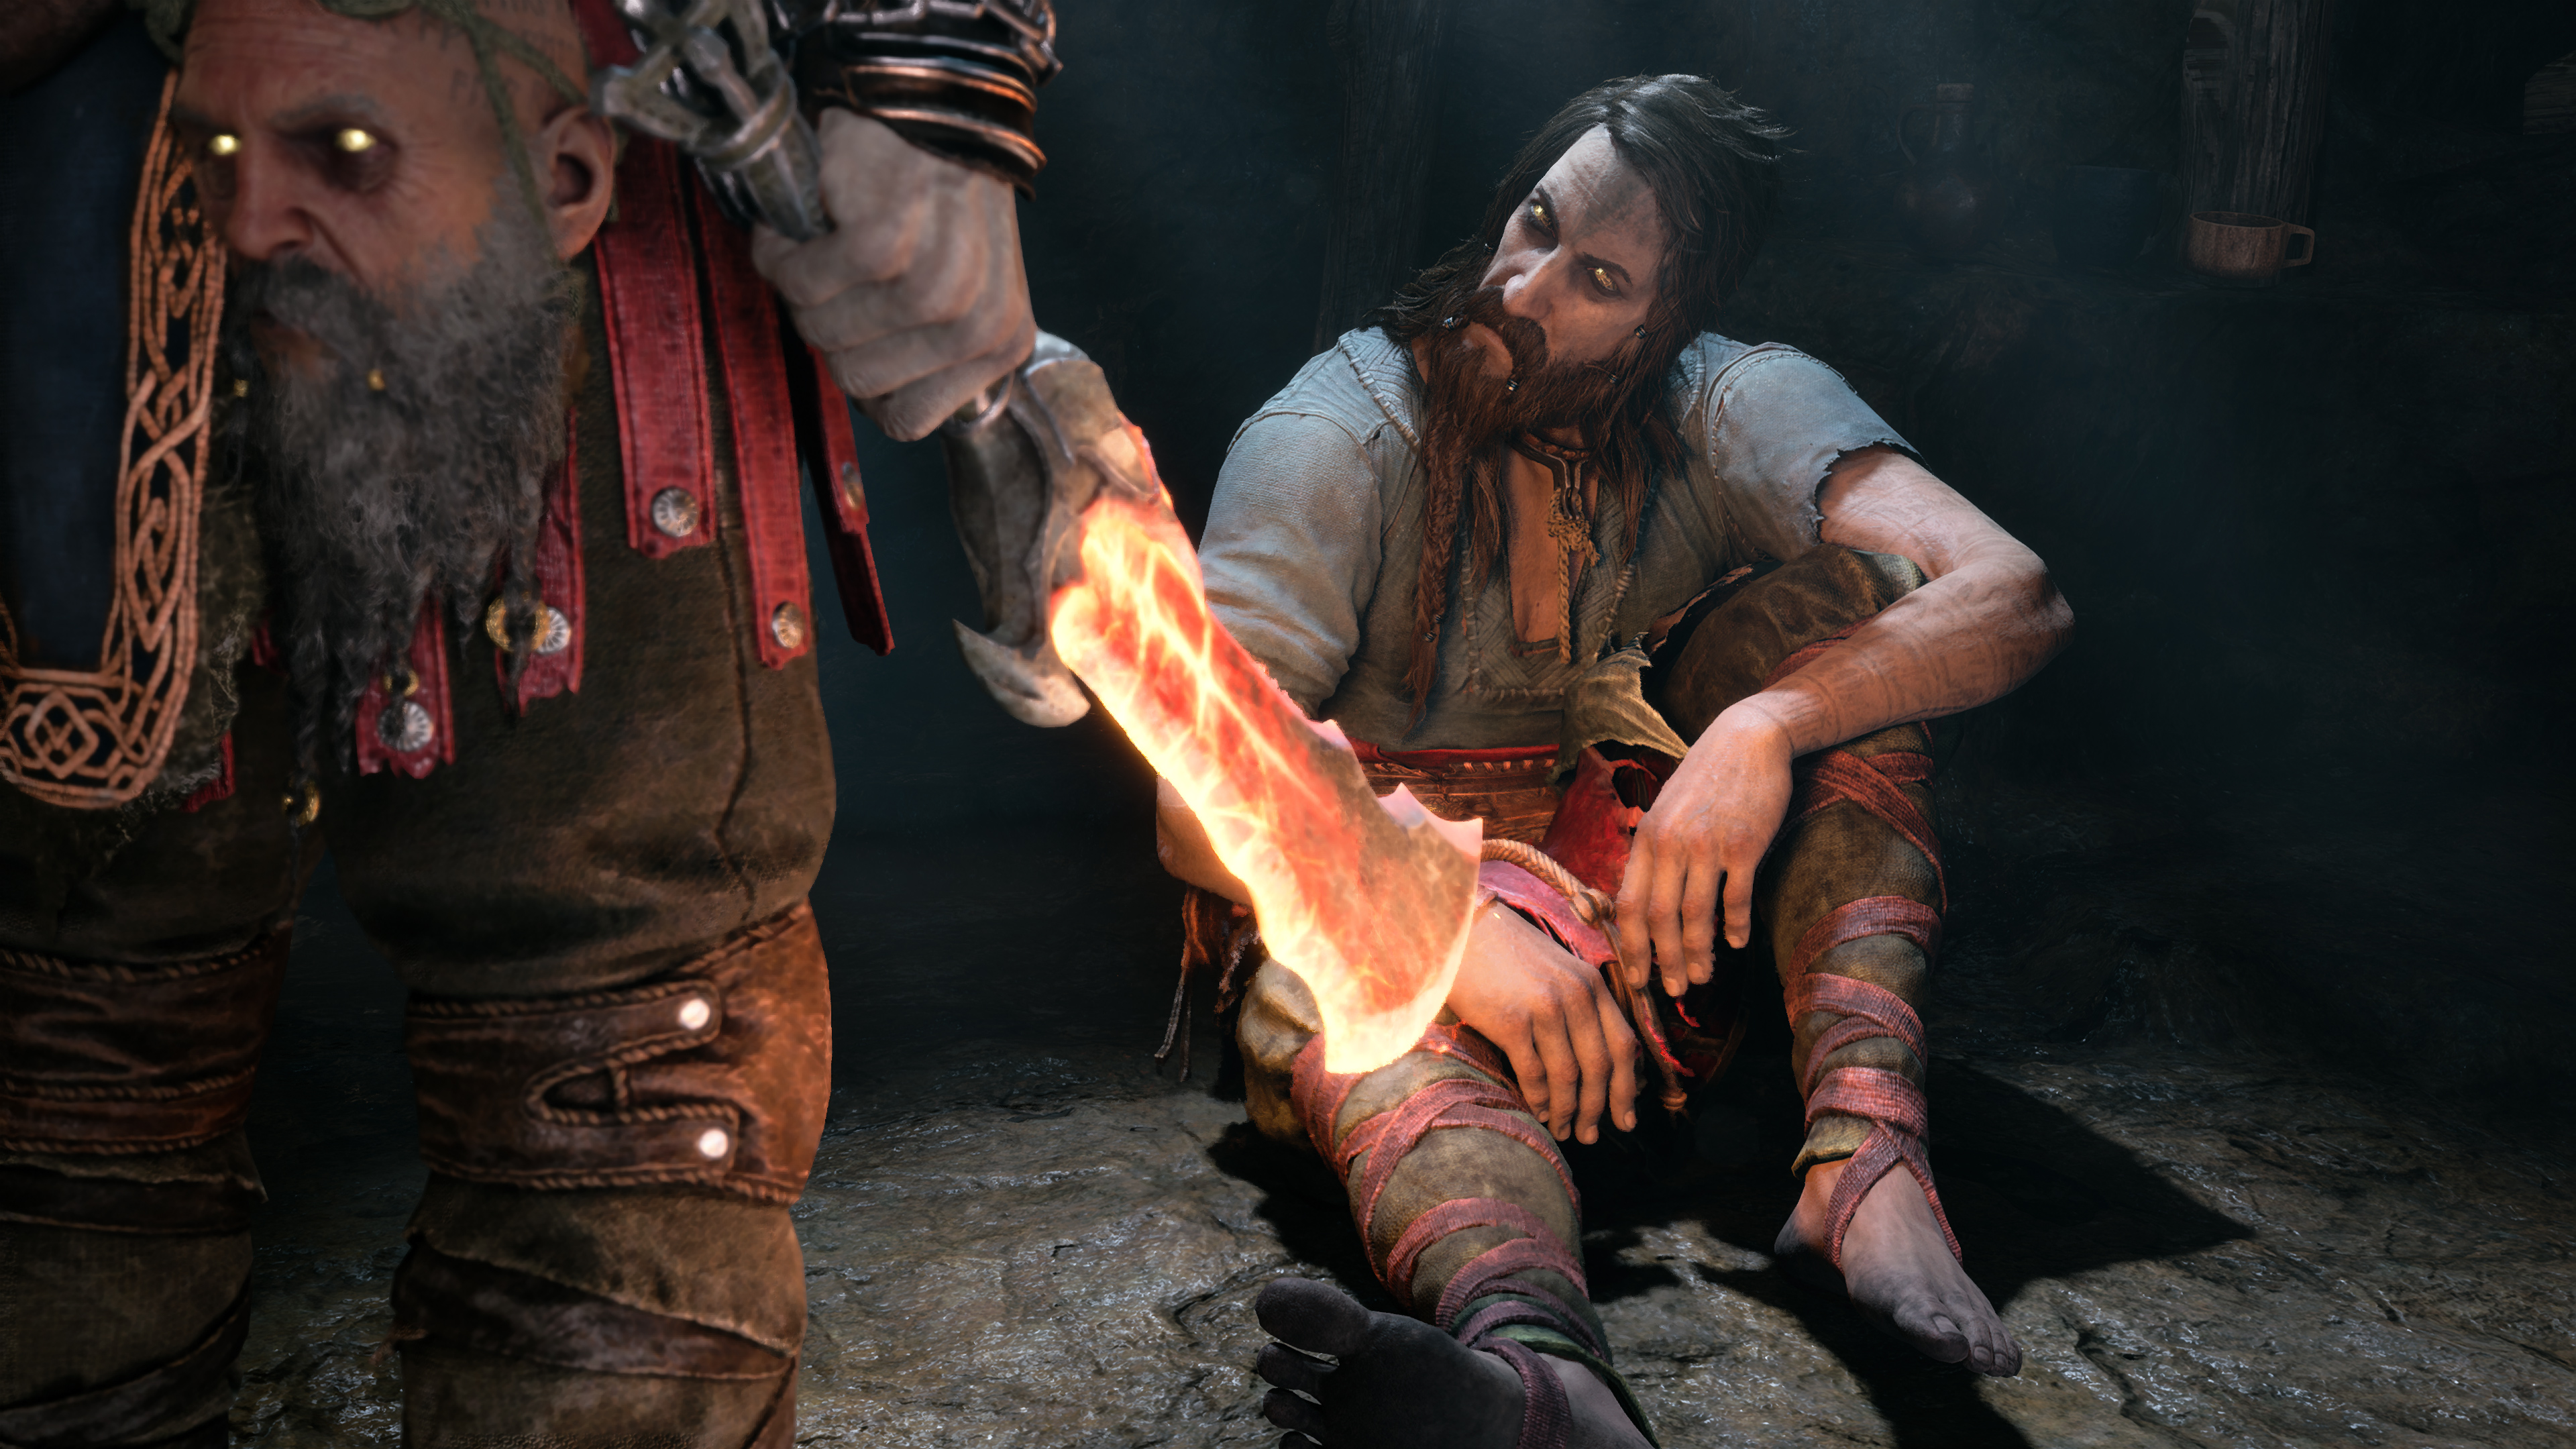 Kratos holding one of his Blades of Chaos, which is glowing red with heat, in front of Tyr sitting on the floor